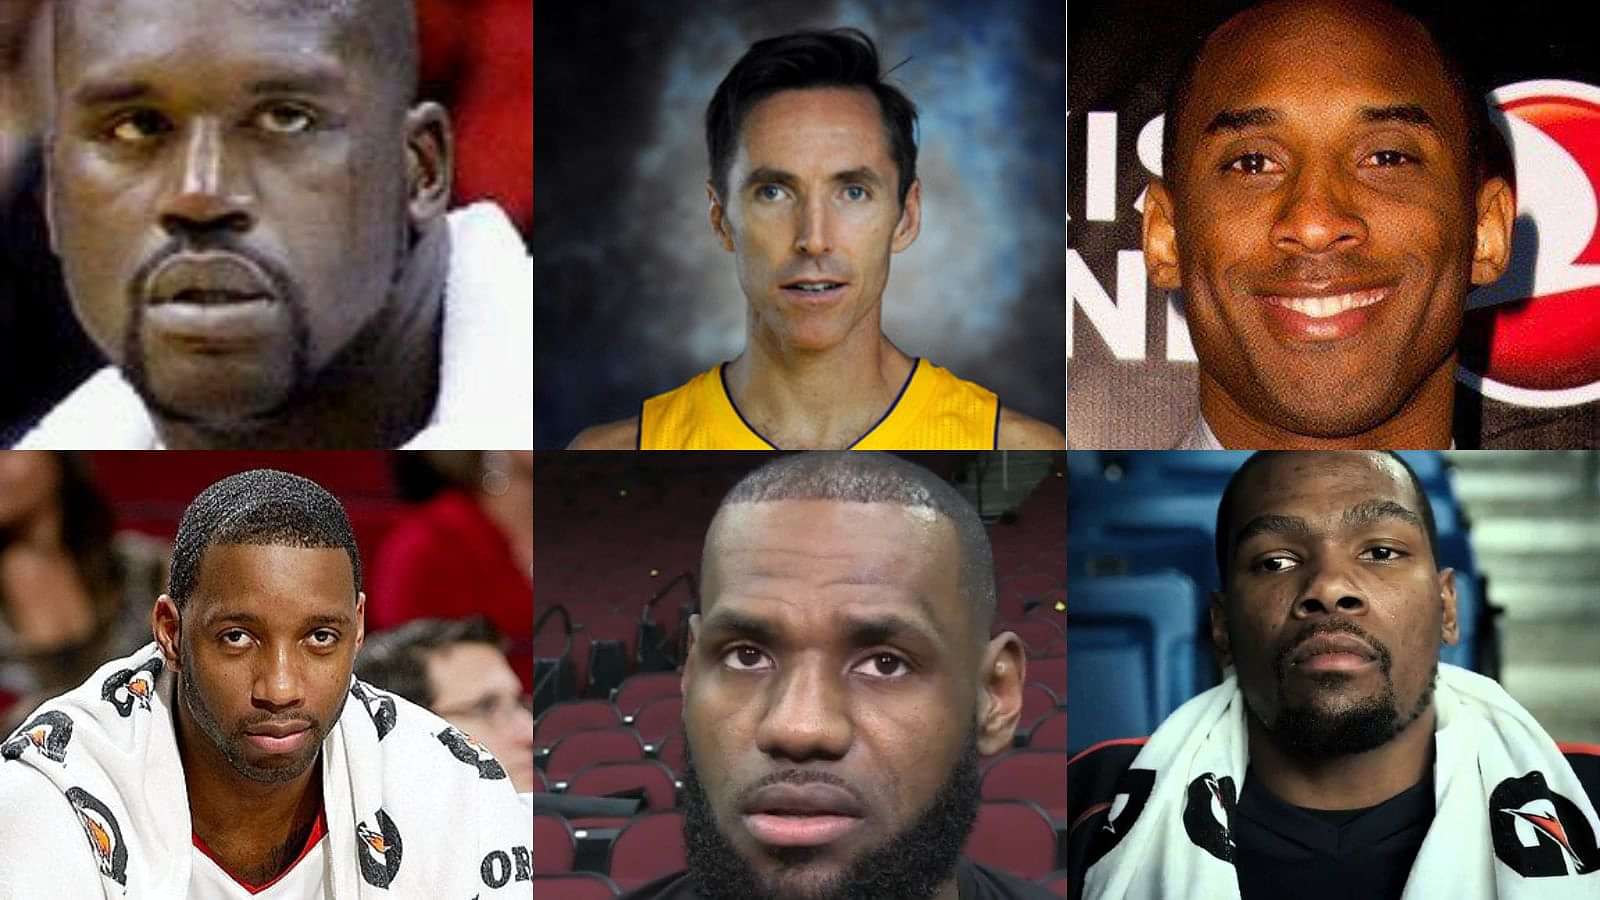 “Shaquille O’Neal, Kobe Bryant, LeBron James, and 4 other NBA greats ...